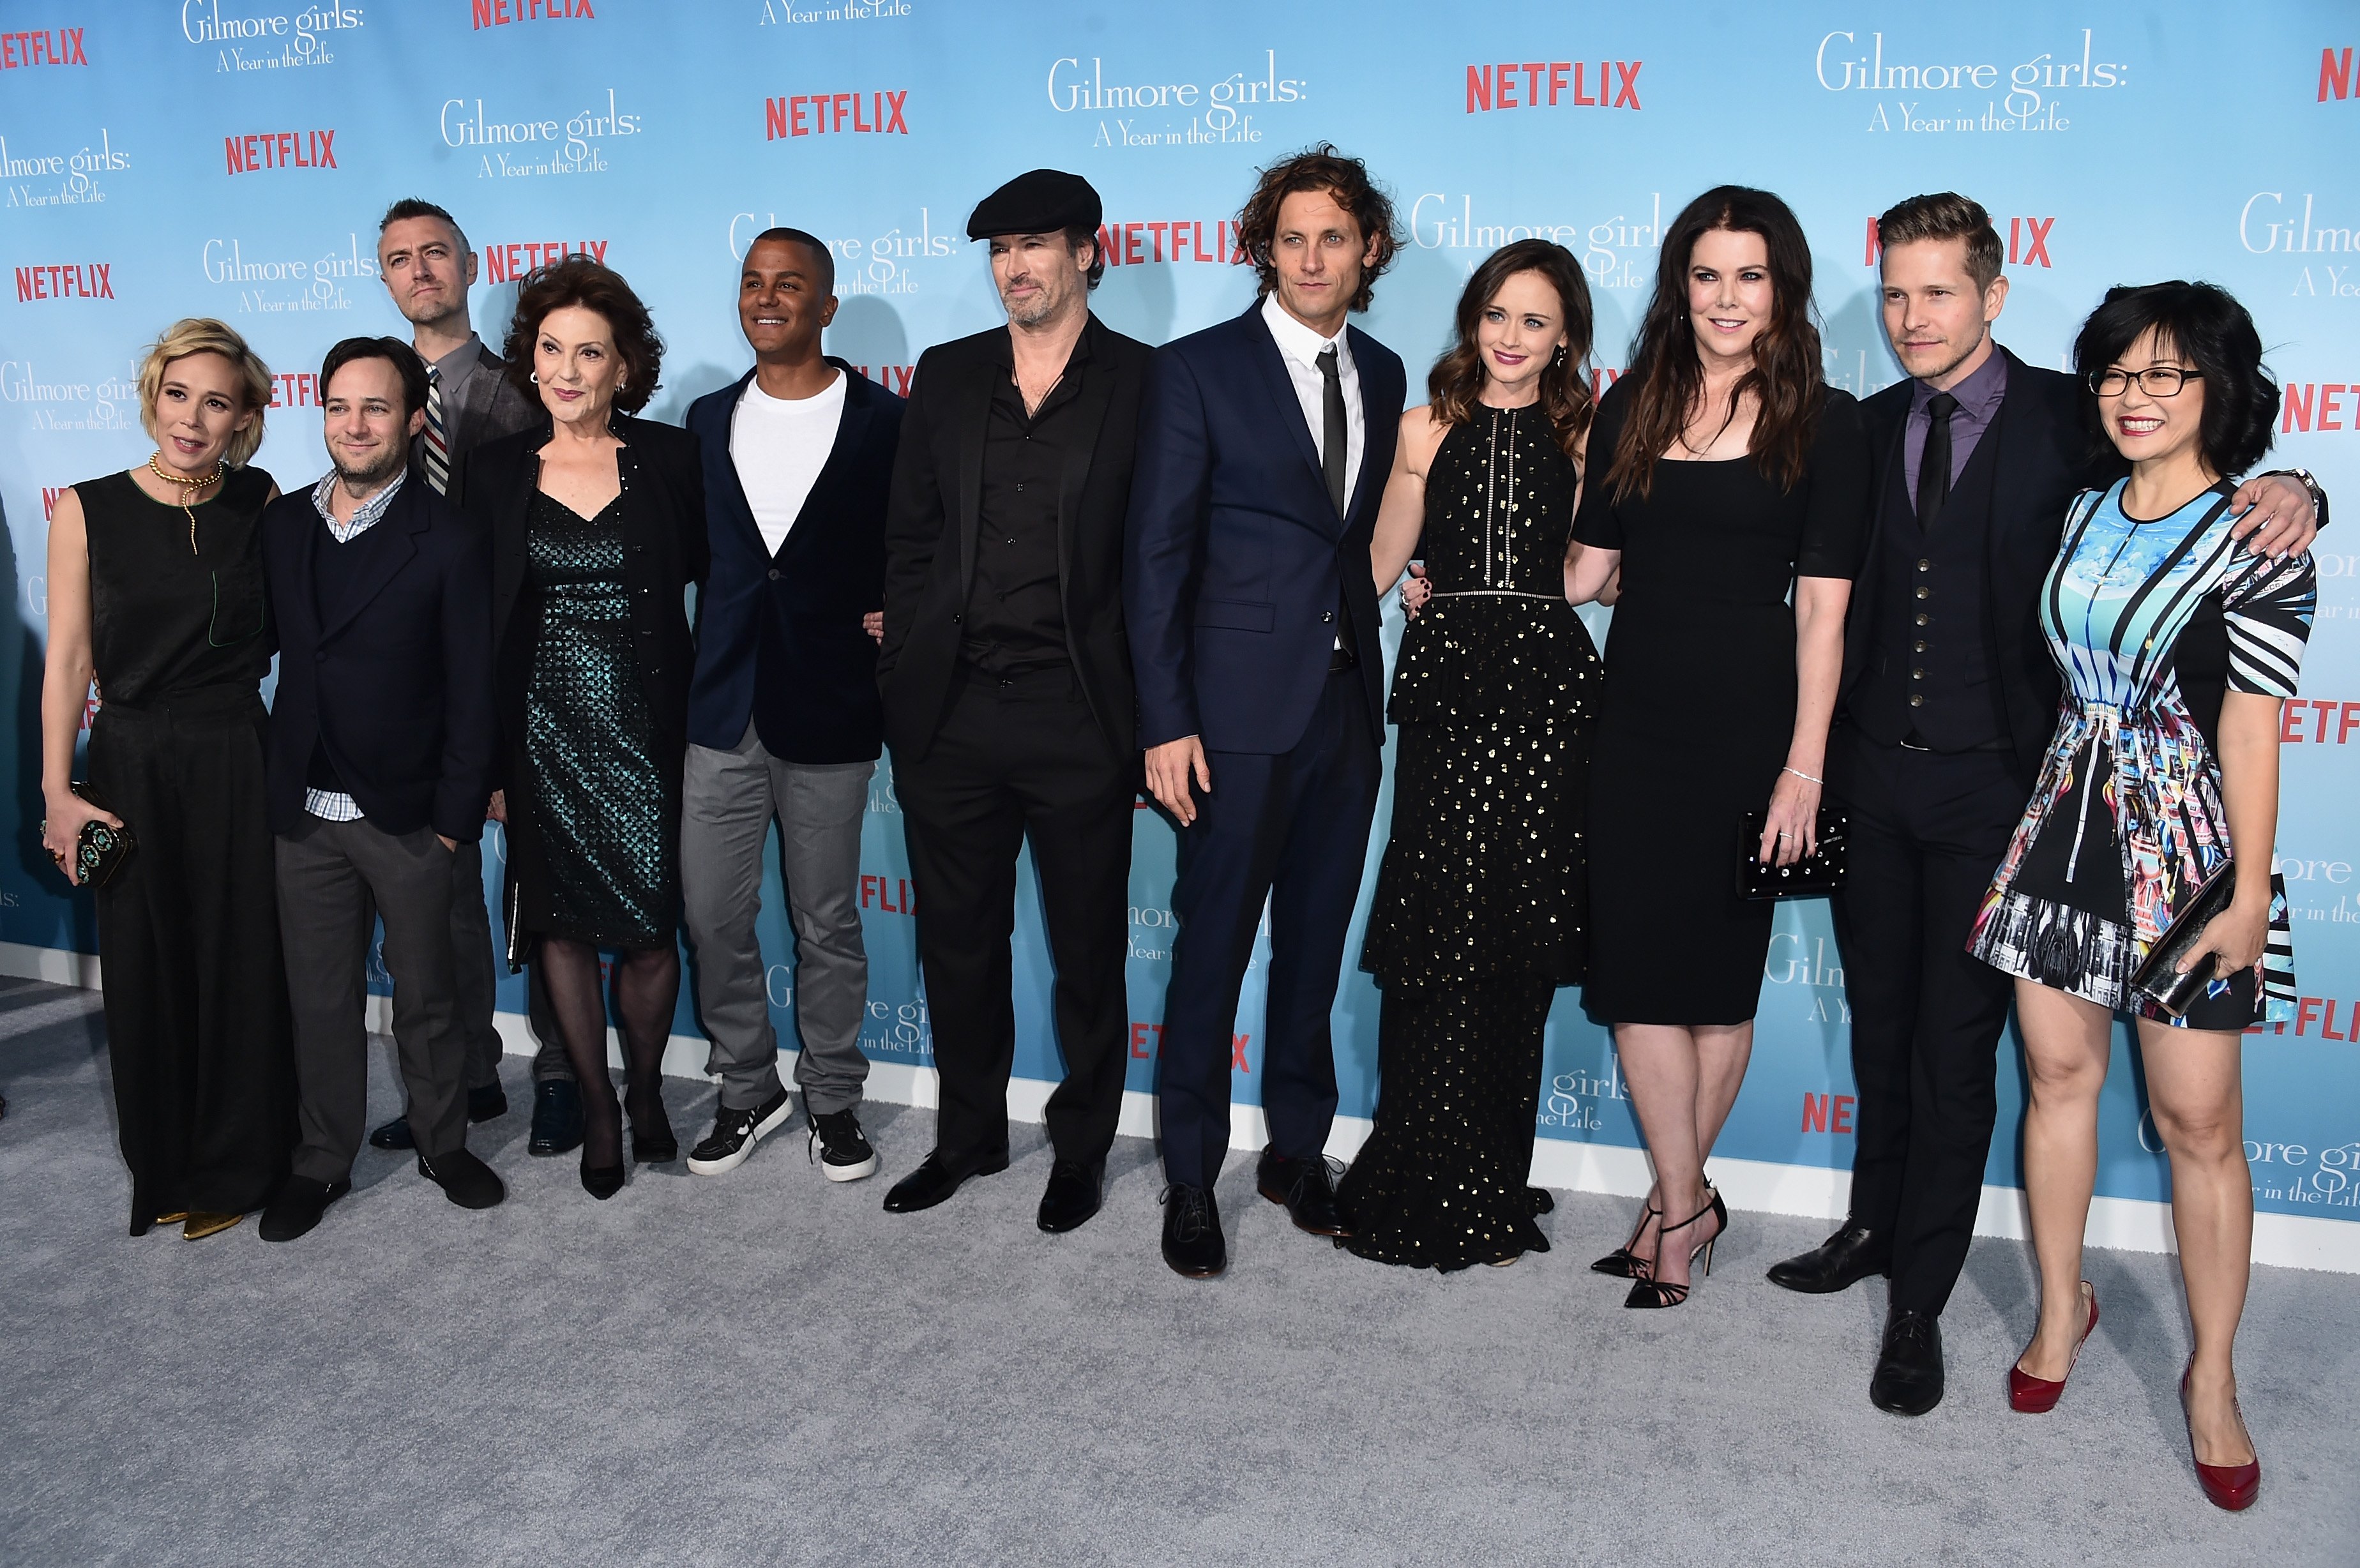 Liza Well, Danny Strong, Sean Gunn, Kelly Bishop, Yanic Truesdale, Scott Patterson, Tanc Sade, Alexis Bledel, Lauren Graham, Matt Czuchry and Keiko Agena attend the premiere of Netflix's 'Gilmore Girls: A Year in the Life' at the Regency Bruin Theatre on November 18, 2016